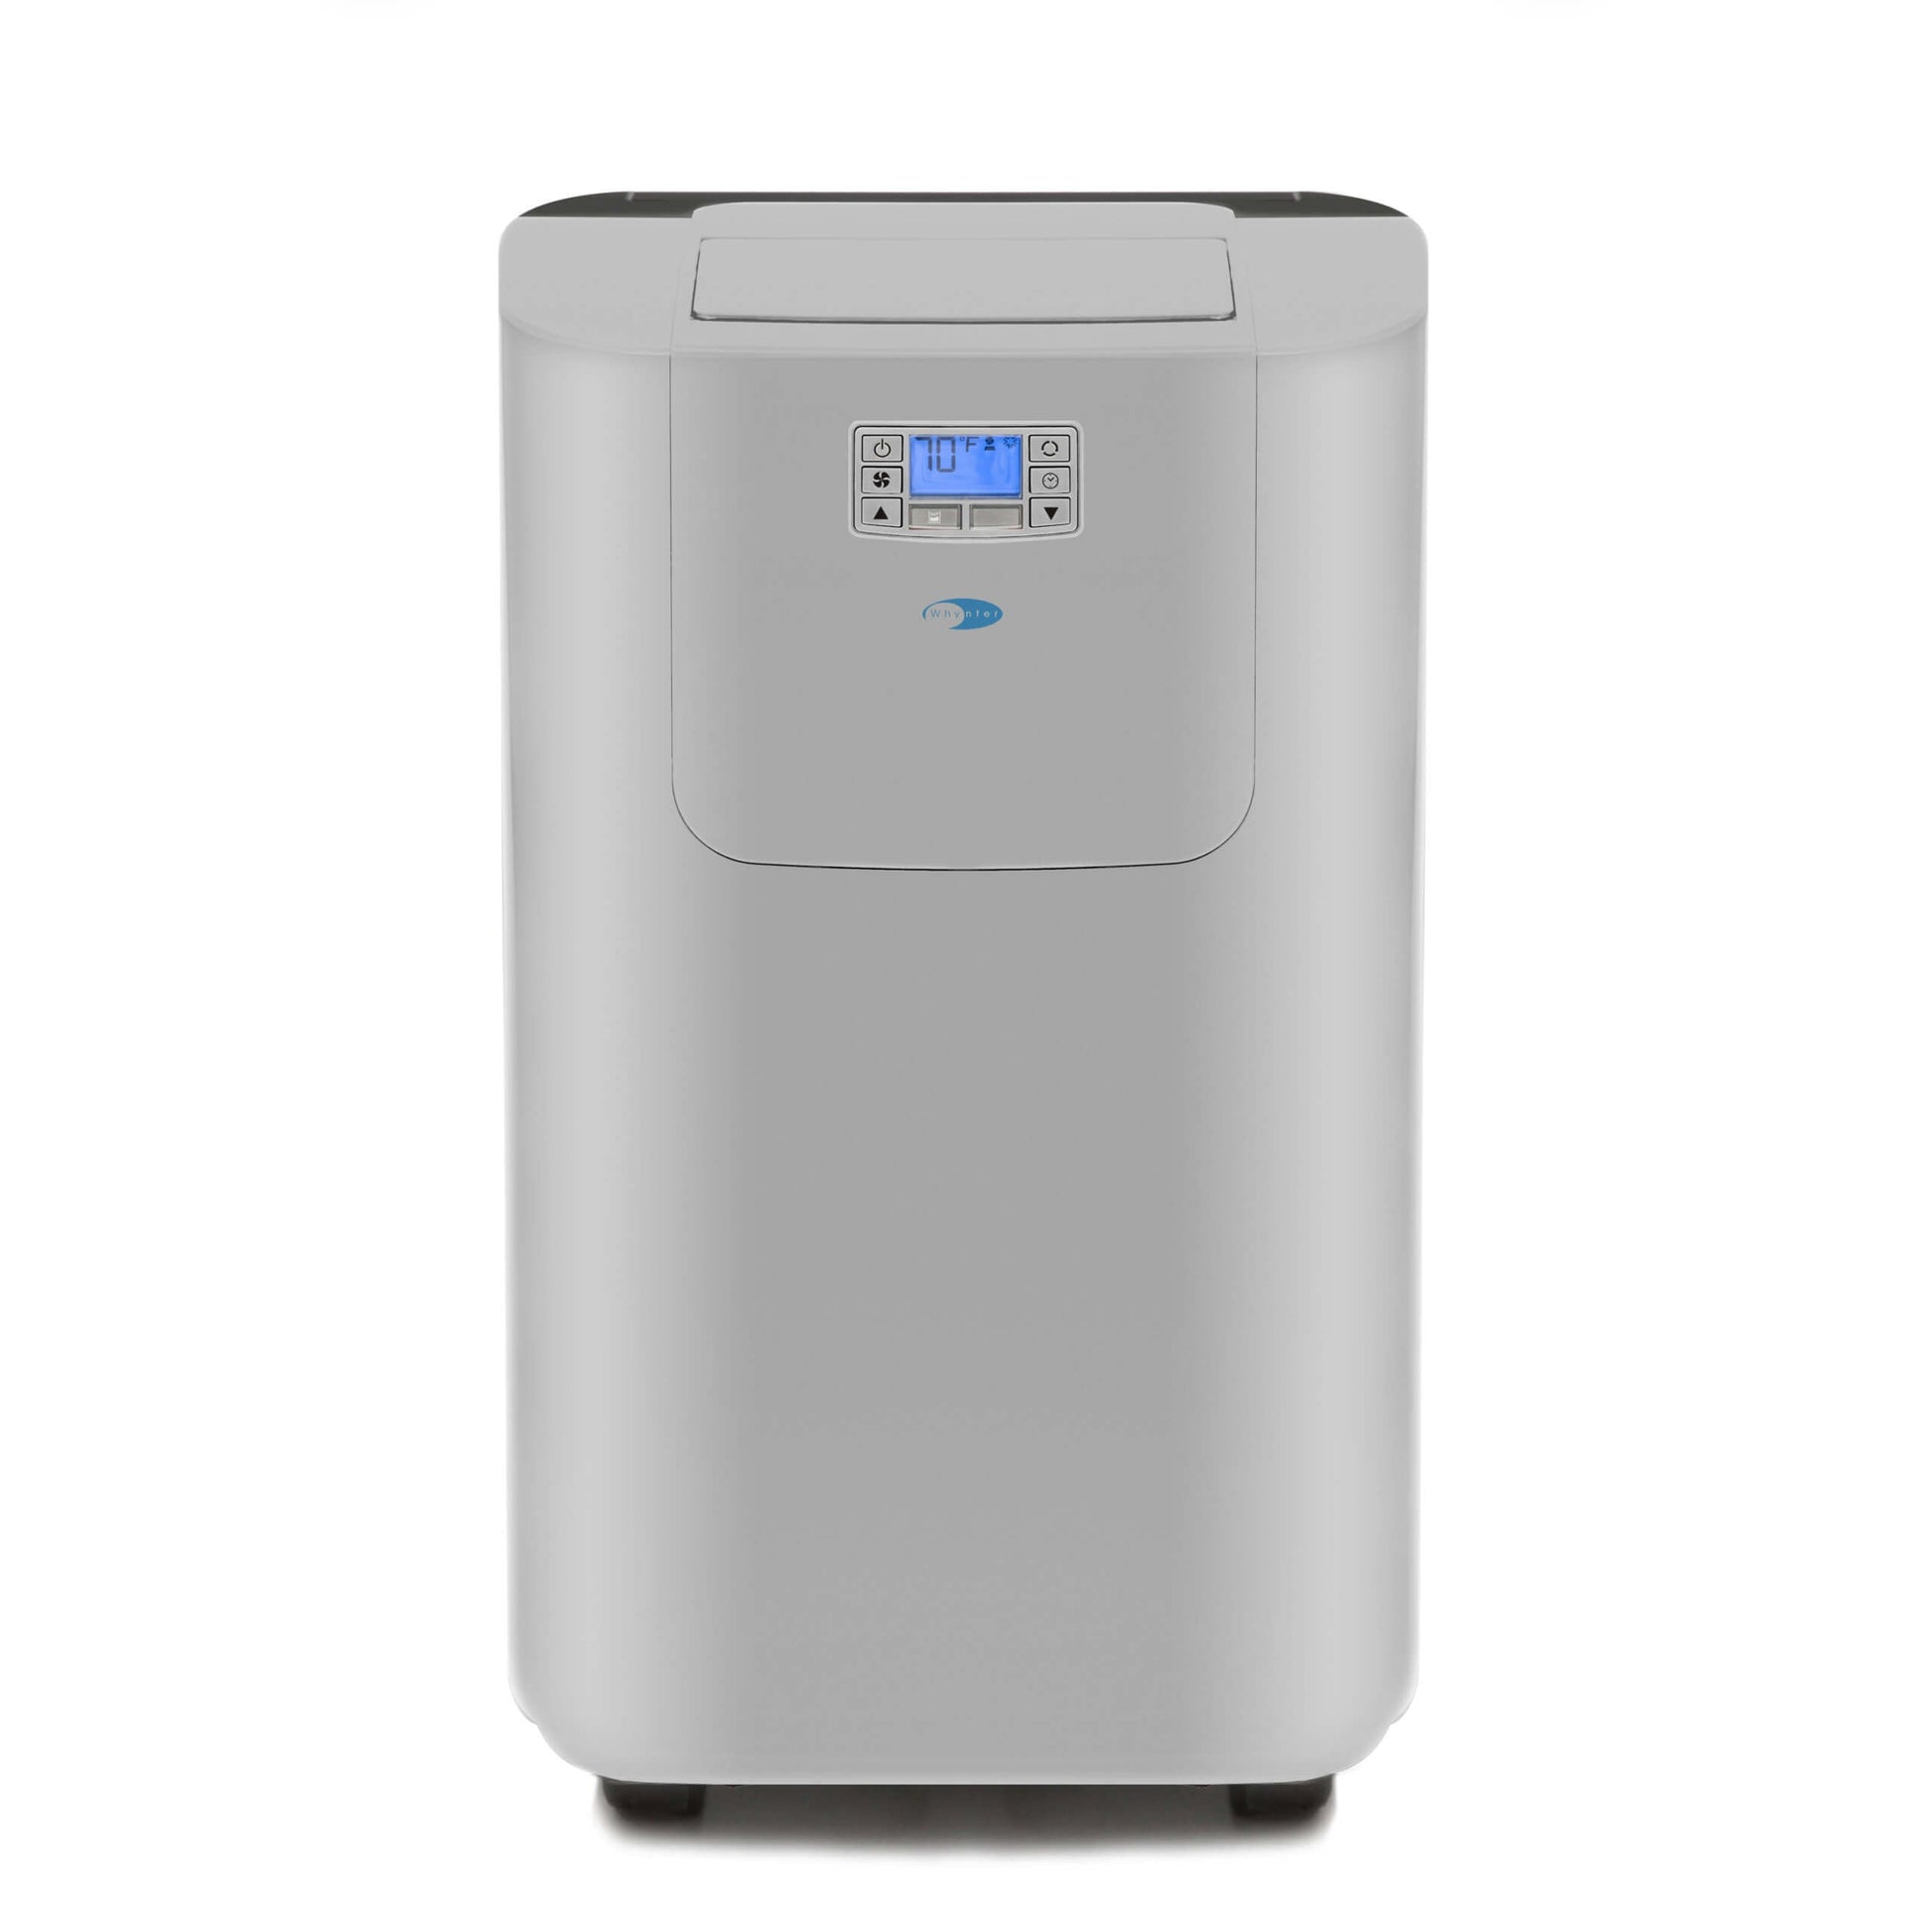 Whynter Air Conditioners Whynter ARC-122DHP 12,000 BTU (7,000 BTU SACC) Elite Dual Hose Portable Air Conditioner, Heater, Dehumidifier, and Fan with Activated Carbon Filter plus Autopump and Storage bag, up to 400 sq ft in Grey